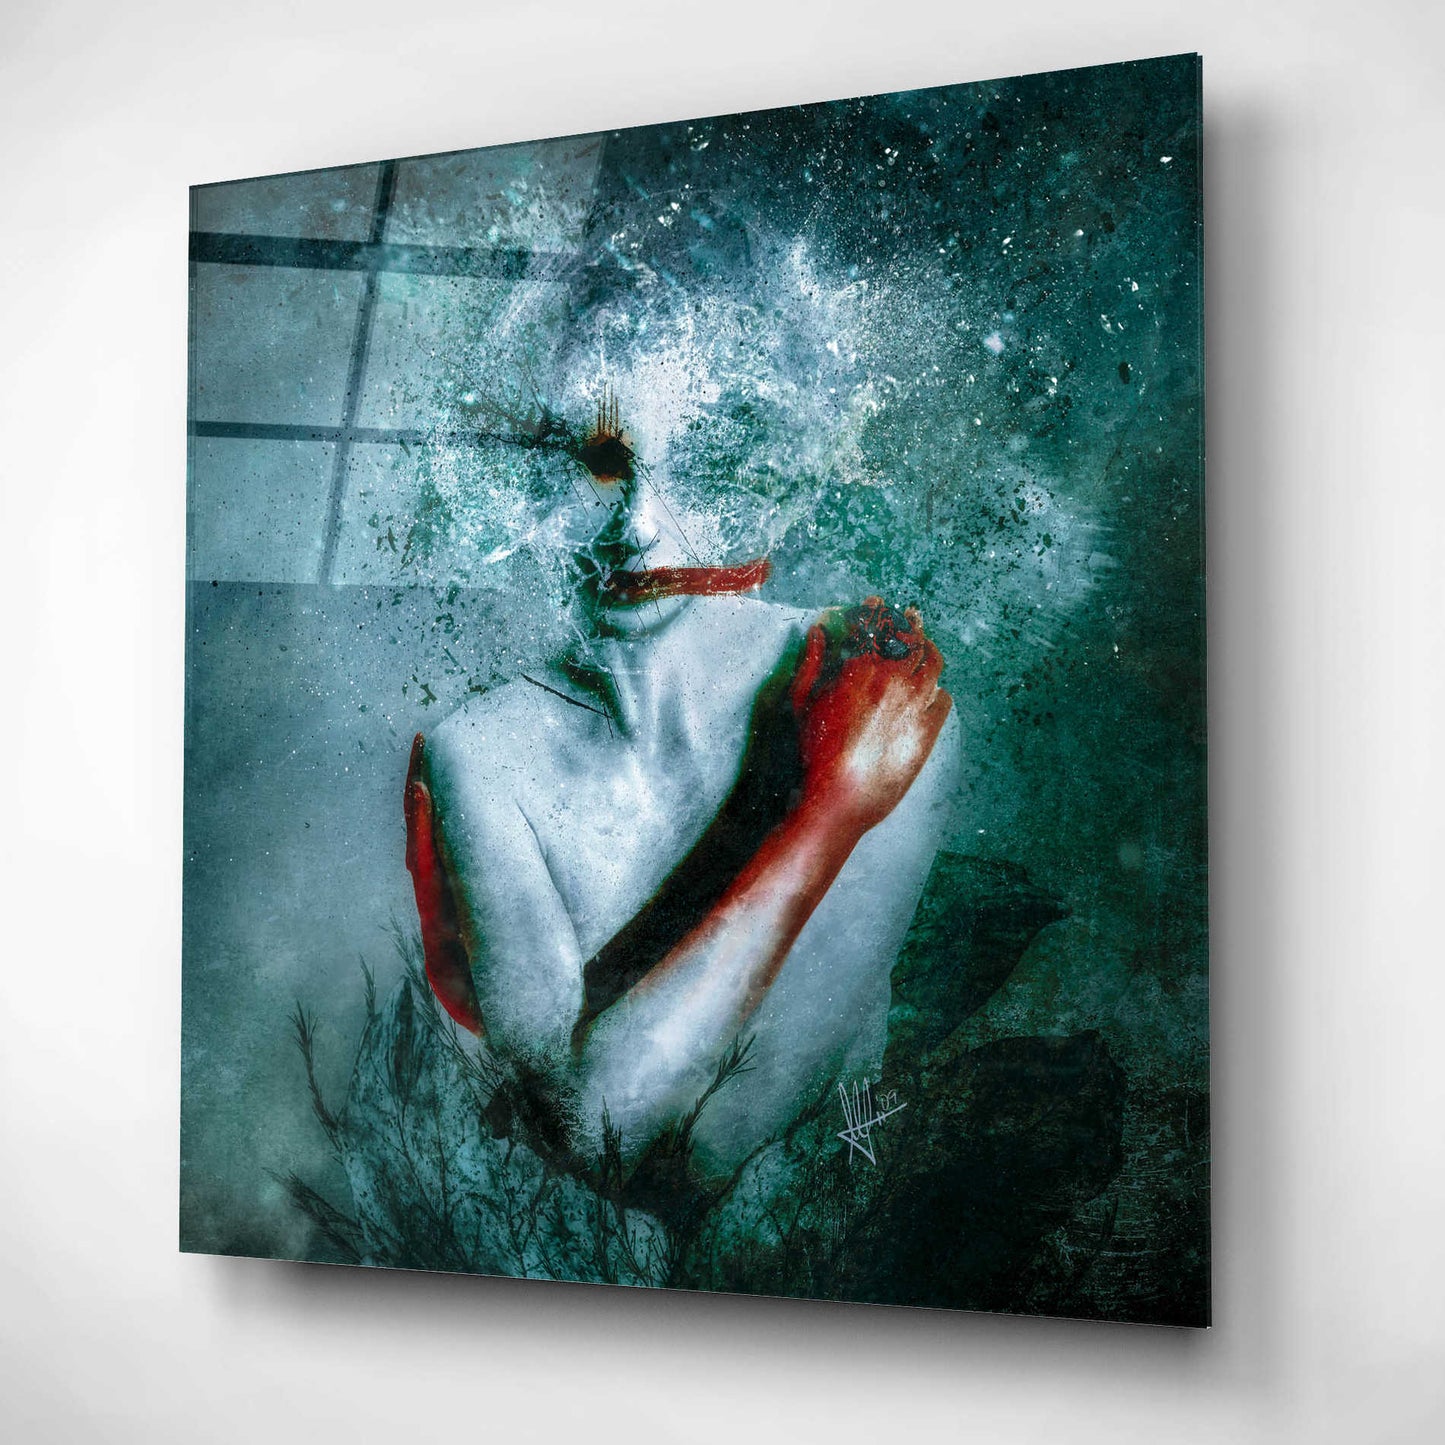 Epic Art '(Blooming) Protection' by Mario Sanchez Nevado, Acrylic Glass Wall Art,12x12